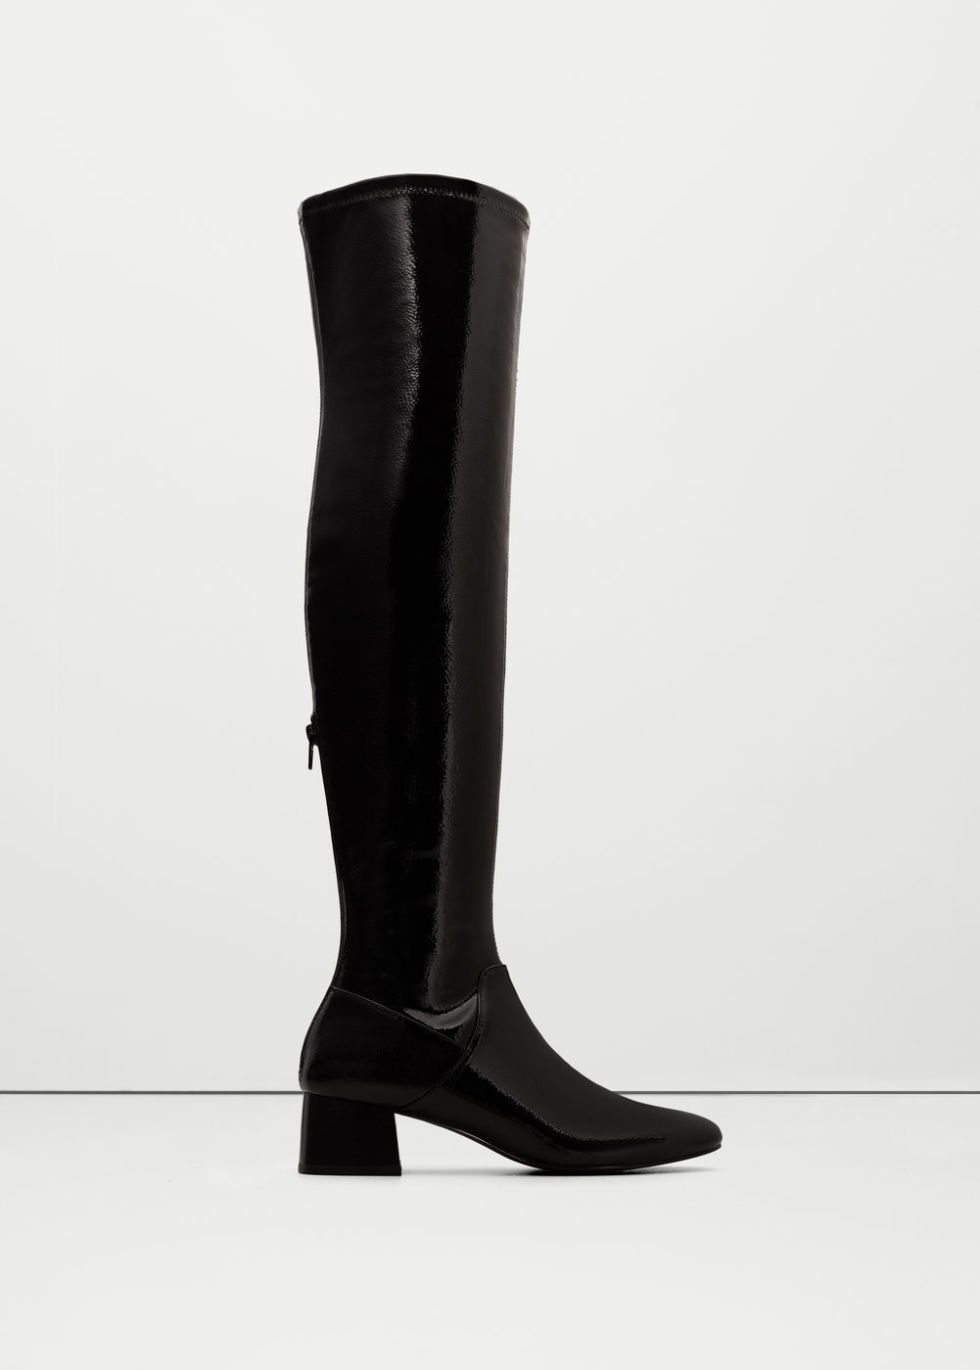 Shoe, Boot, Riding boot, Knee-high boot, Black, Leather, Rain boot, Synthetic rubber, Costume accessory, Still life photography, 